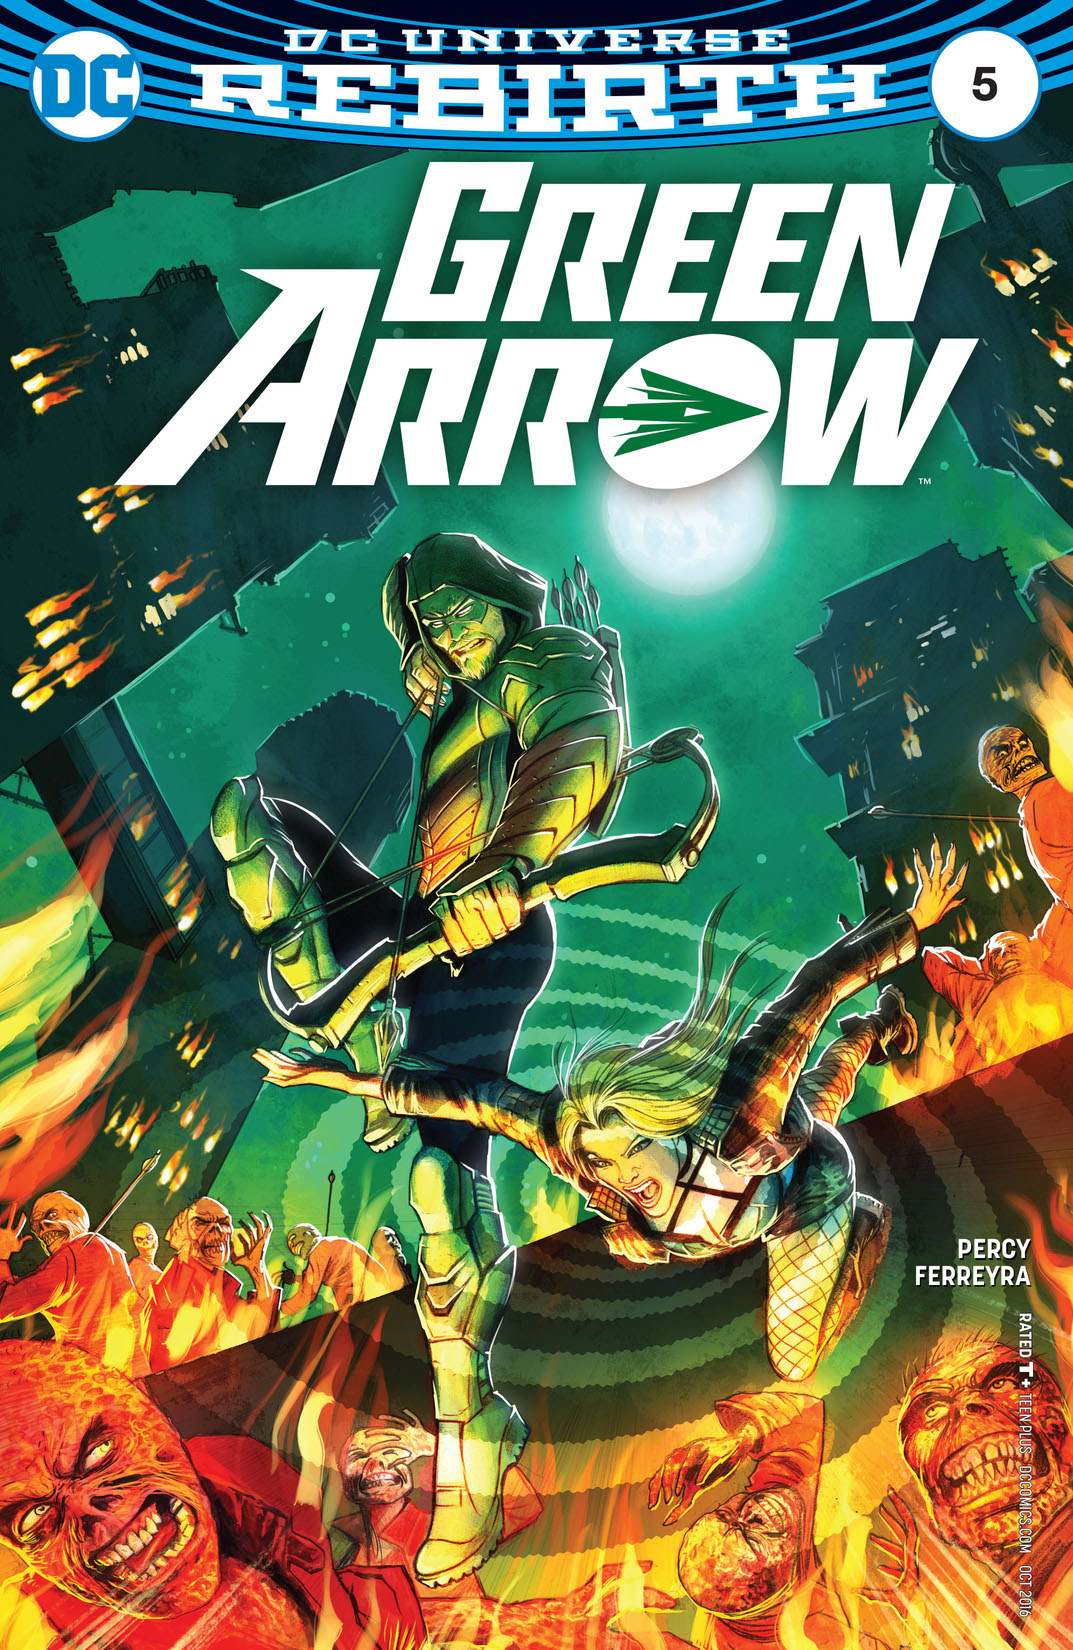 Green Arrow (2016-) #5 preview images